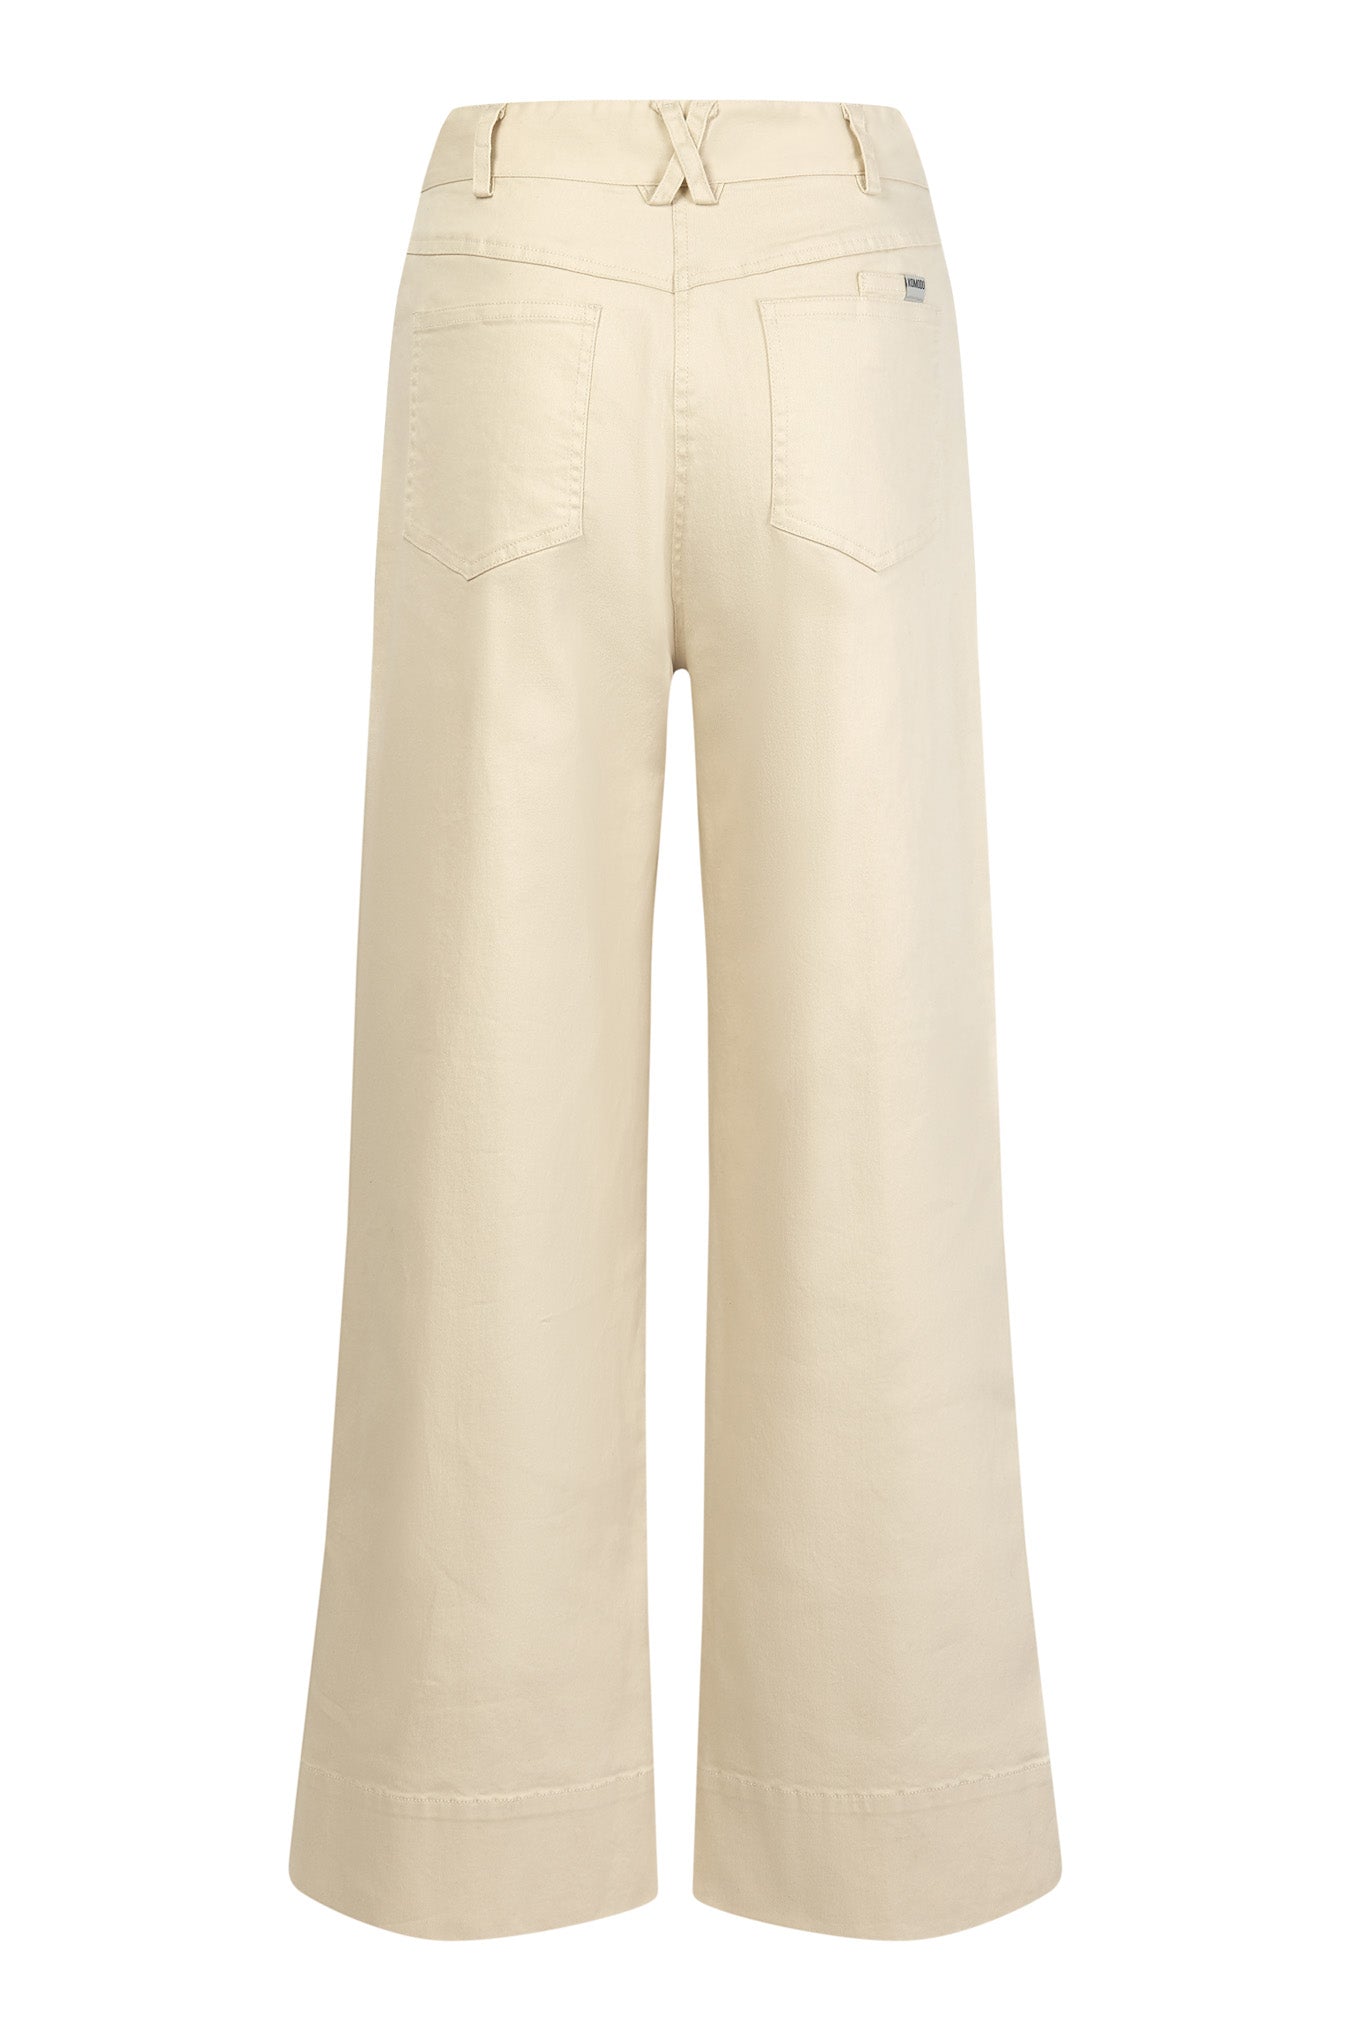 Beige Lynx trousers made of organic cotton from Komodo